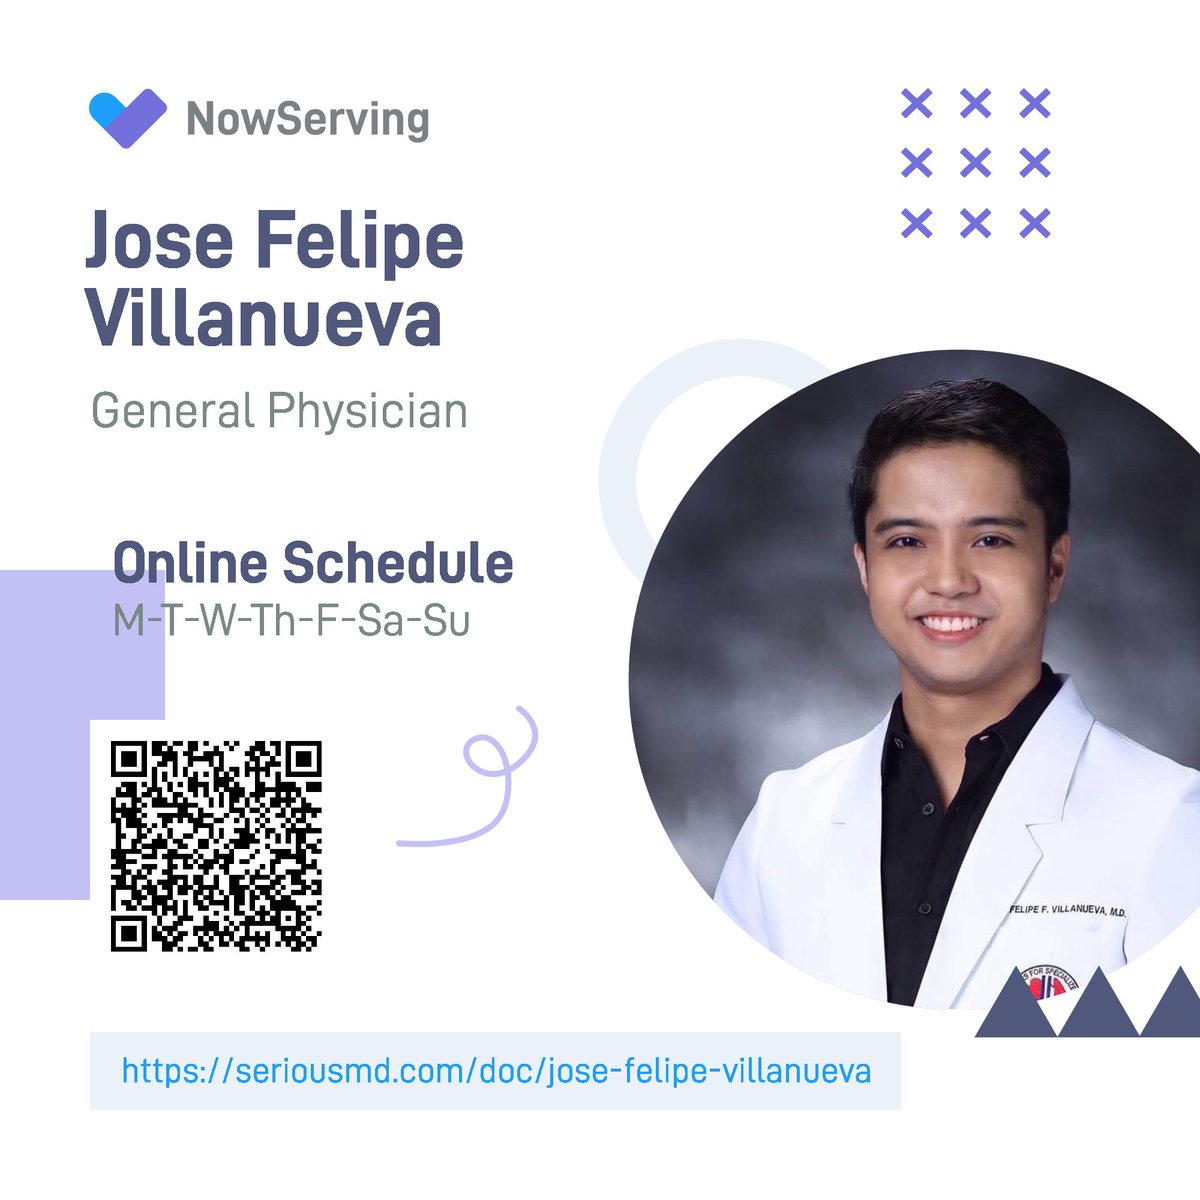 Book a consultation schedule with Dr. Jose Felipe Villanueva by clicking this link 

seriousmd.com/doc/jose-felip…

 #WeHealAsOne #NowServing